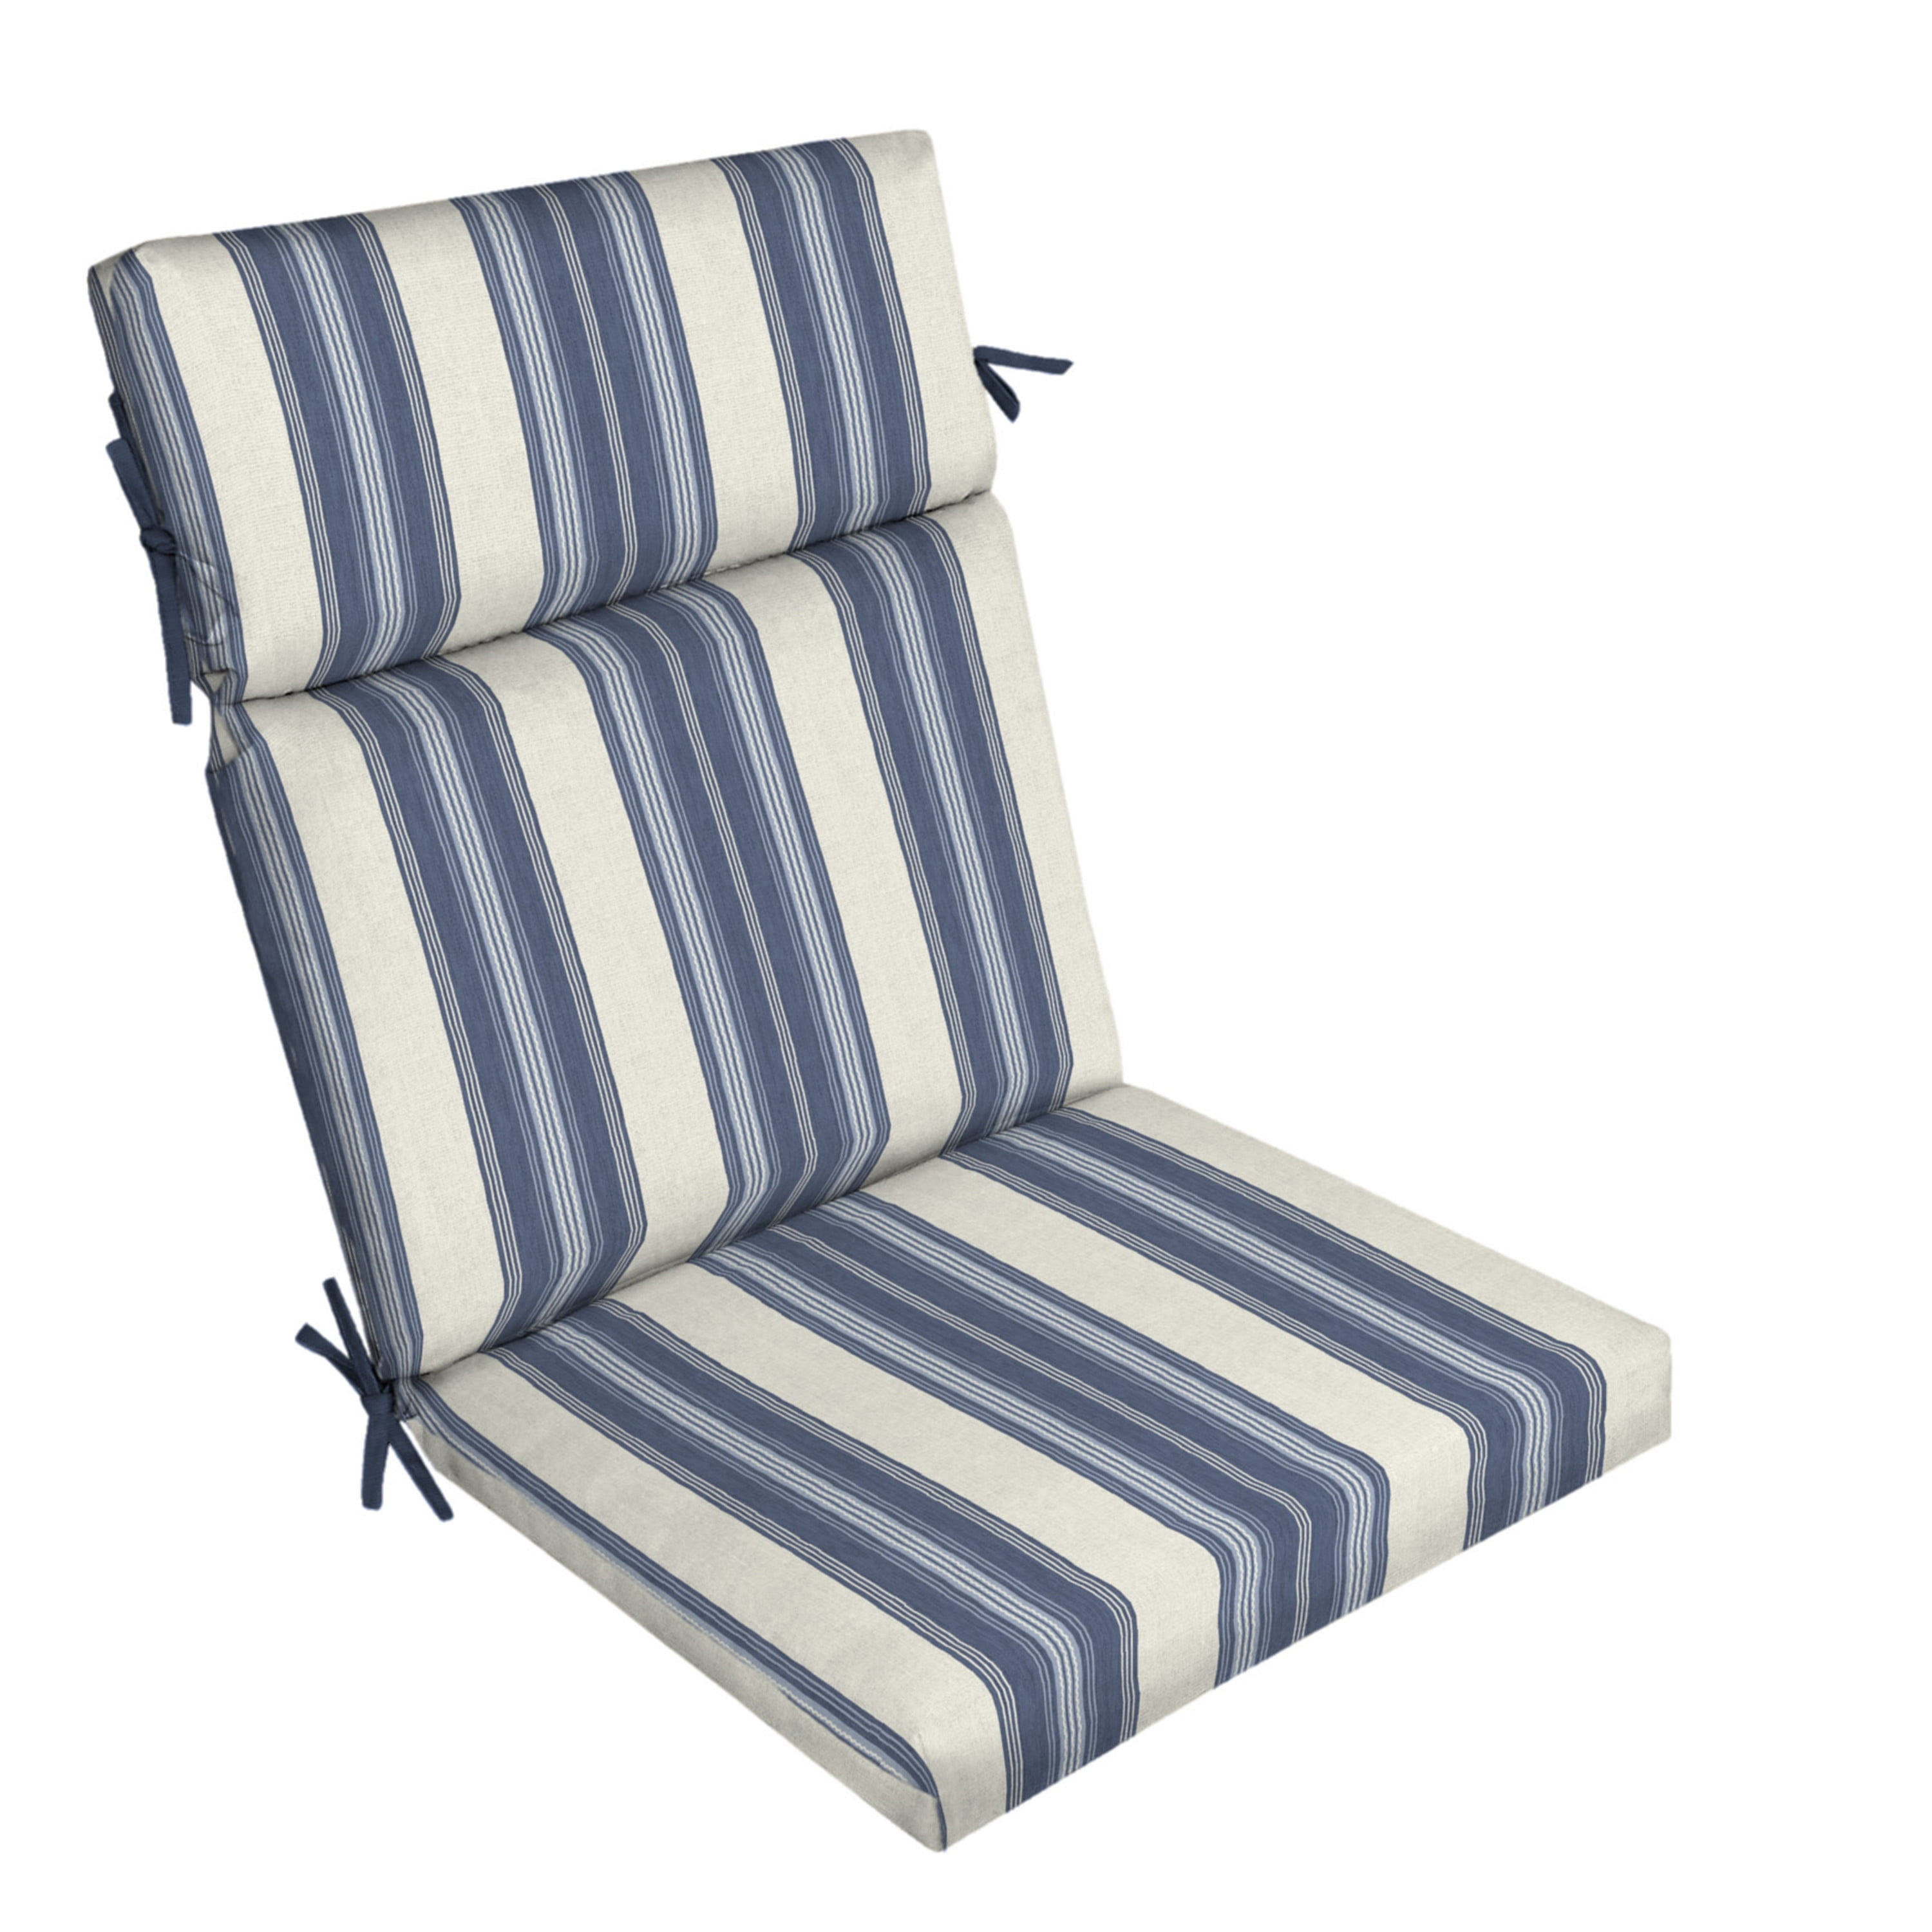 BLISSWALK Patio Chair Cushion for Adirondack High Back Tufted Seat Chair  Cushion Outdoor 48 in. x 21 in. x 4 in. Blue WGB09 - The Home Depot